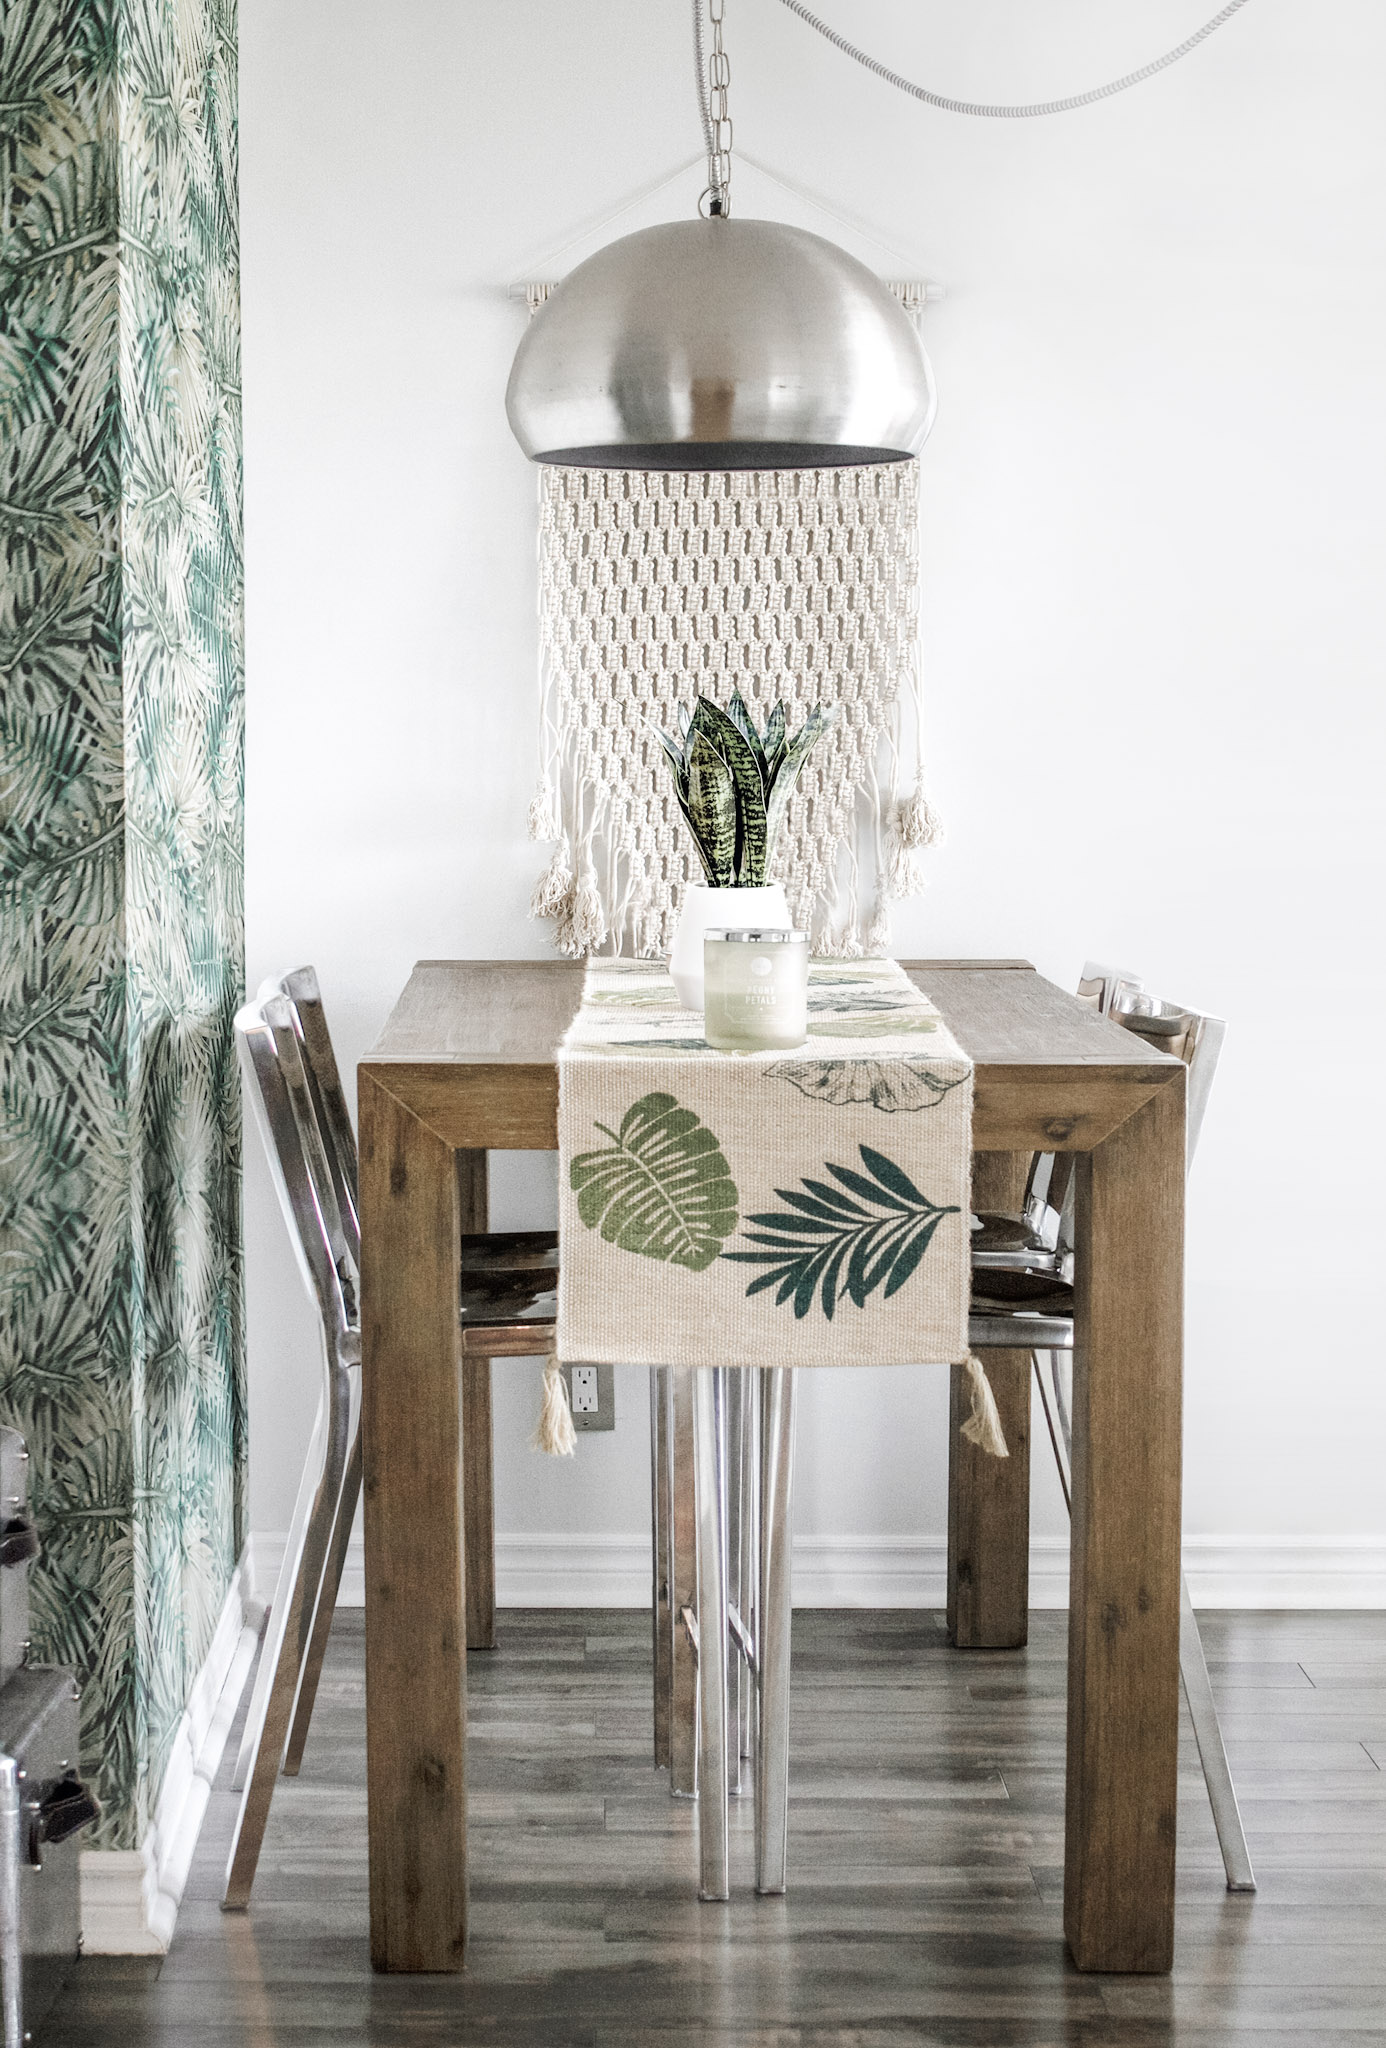 A beautiful boho kitchen with a dining room table. Has green florals and warm tones. This article covers how to get that boho style for those that love nature.